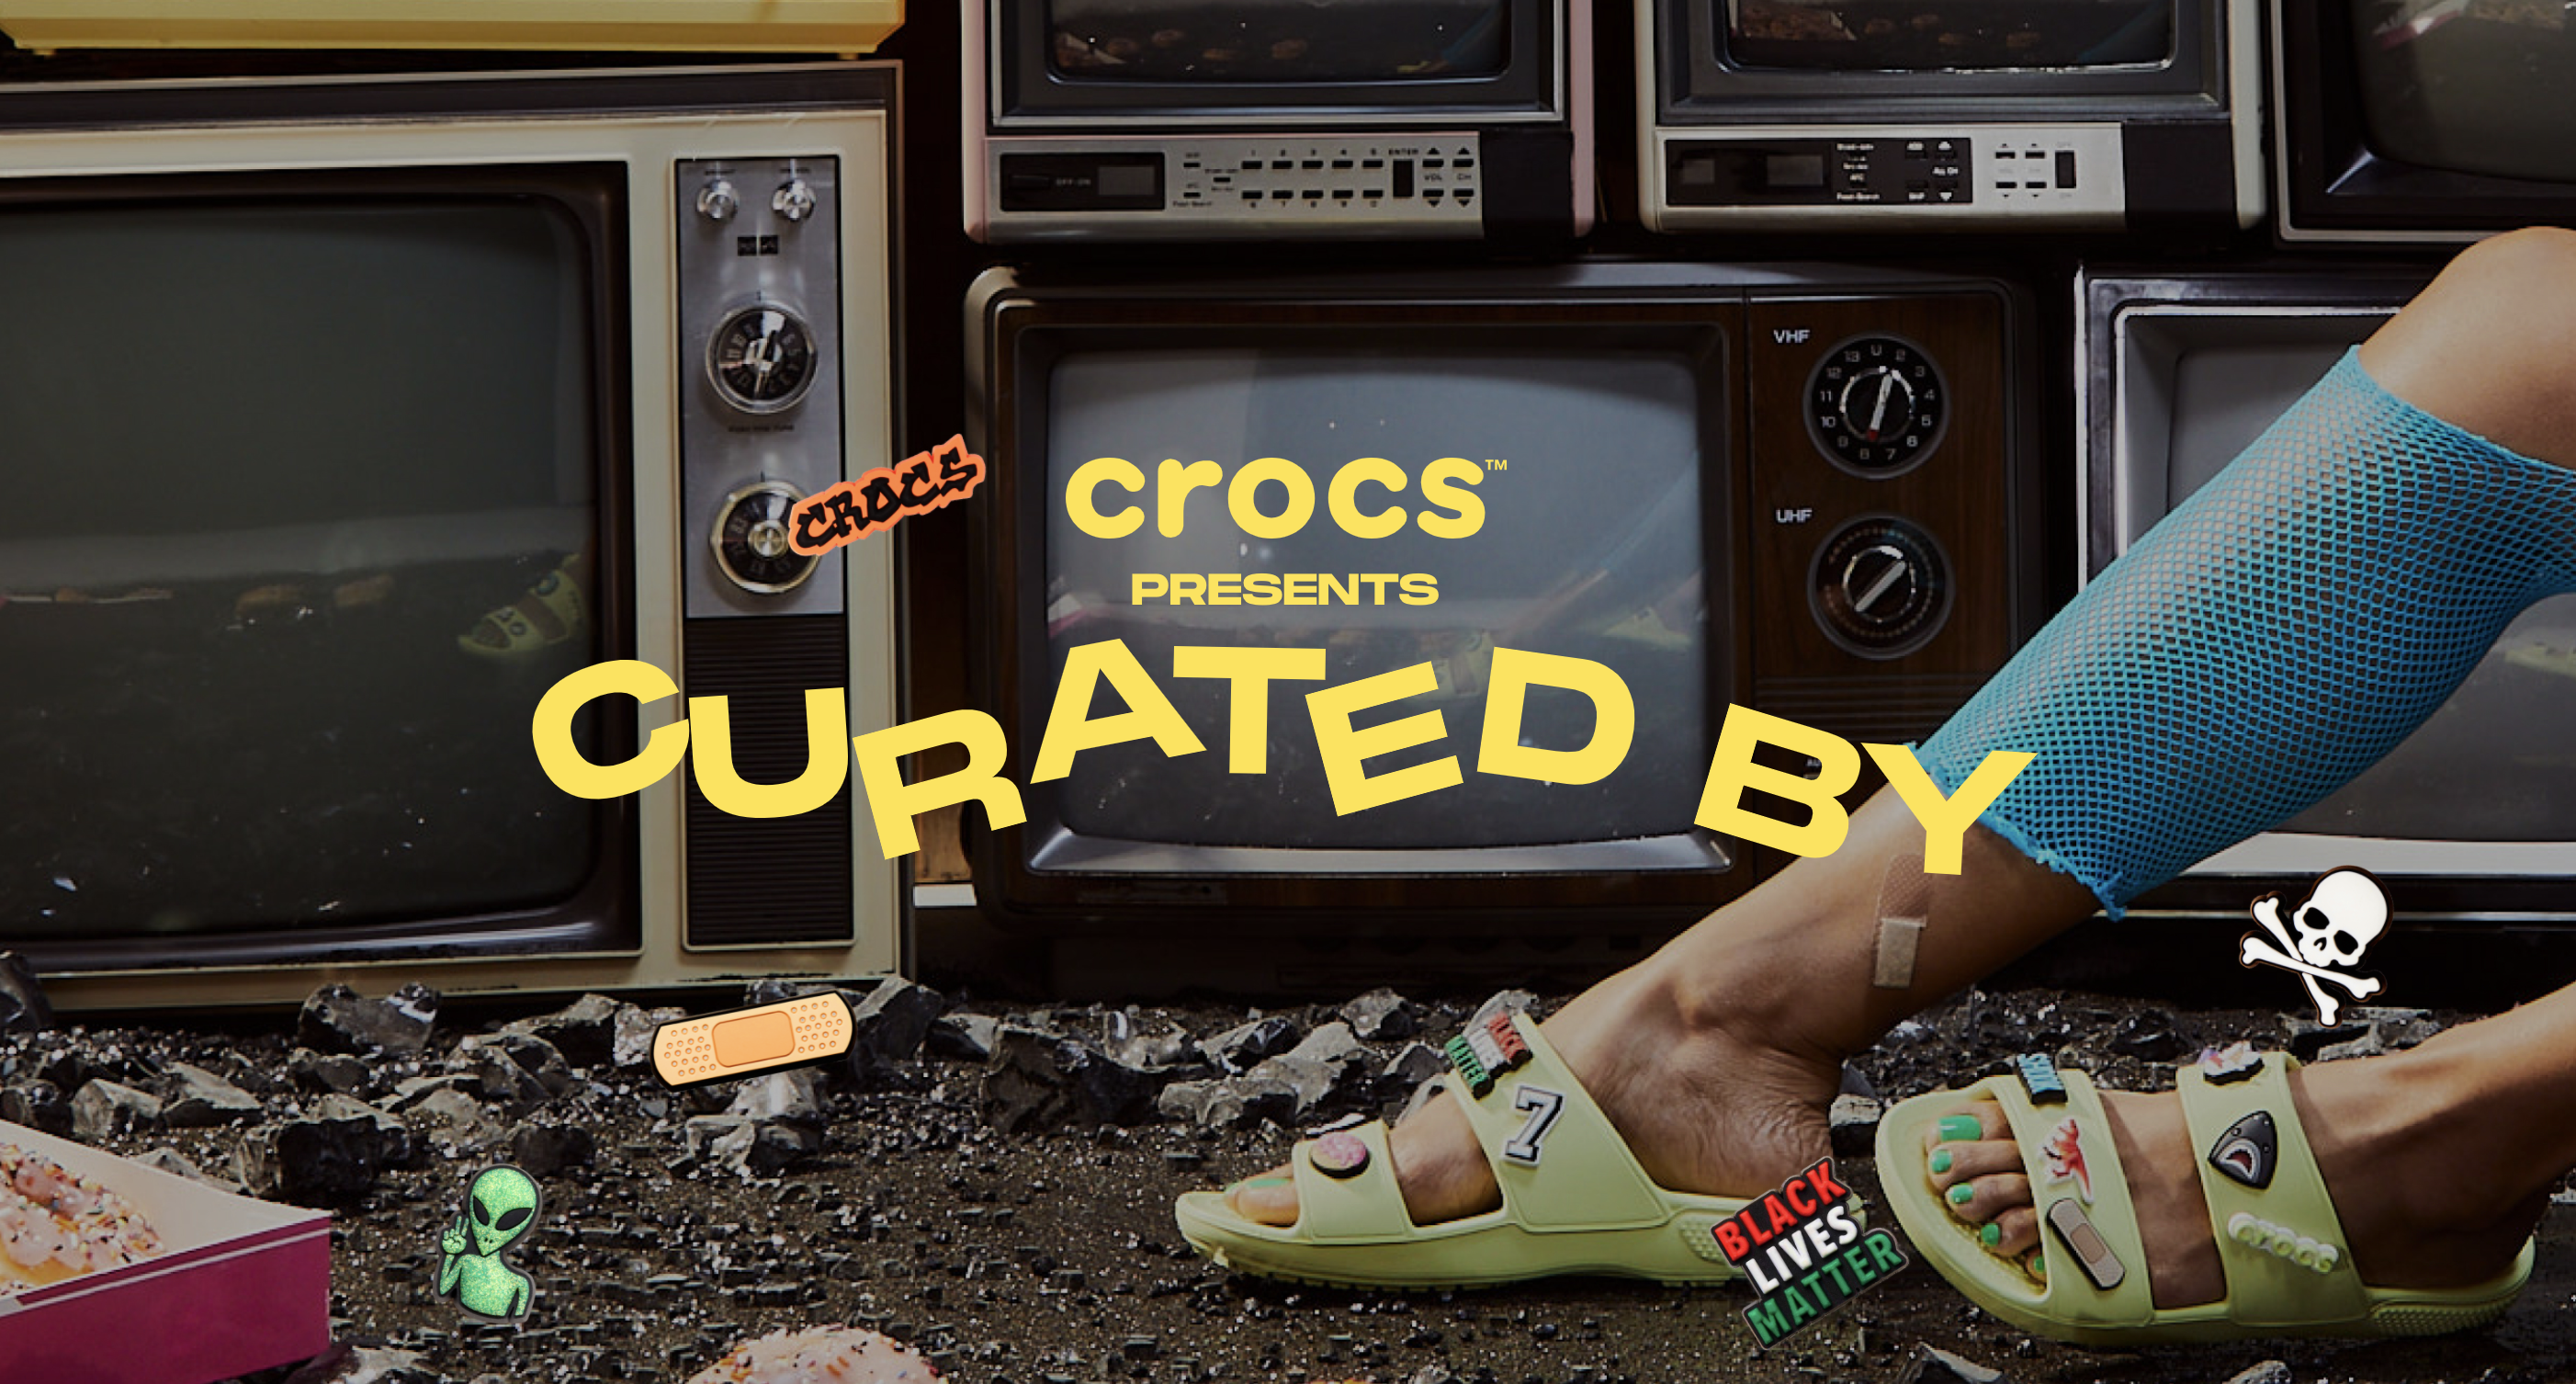 Crocs Presents Curated by